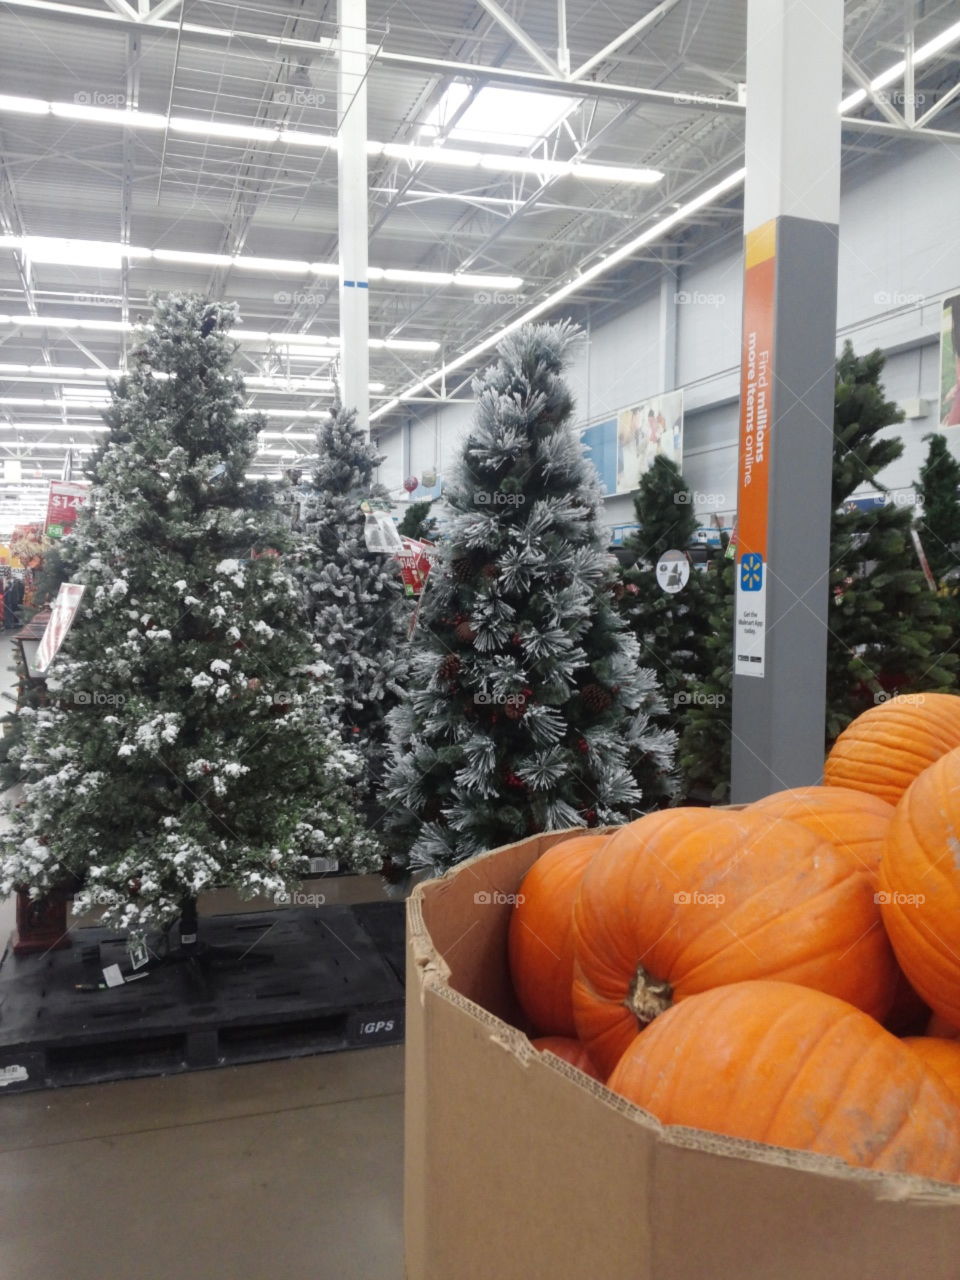 It's almost Halloween...I mean Christmas.